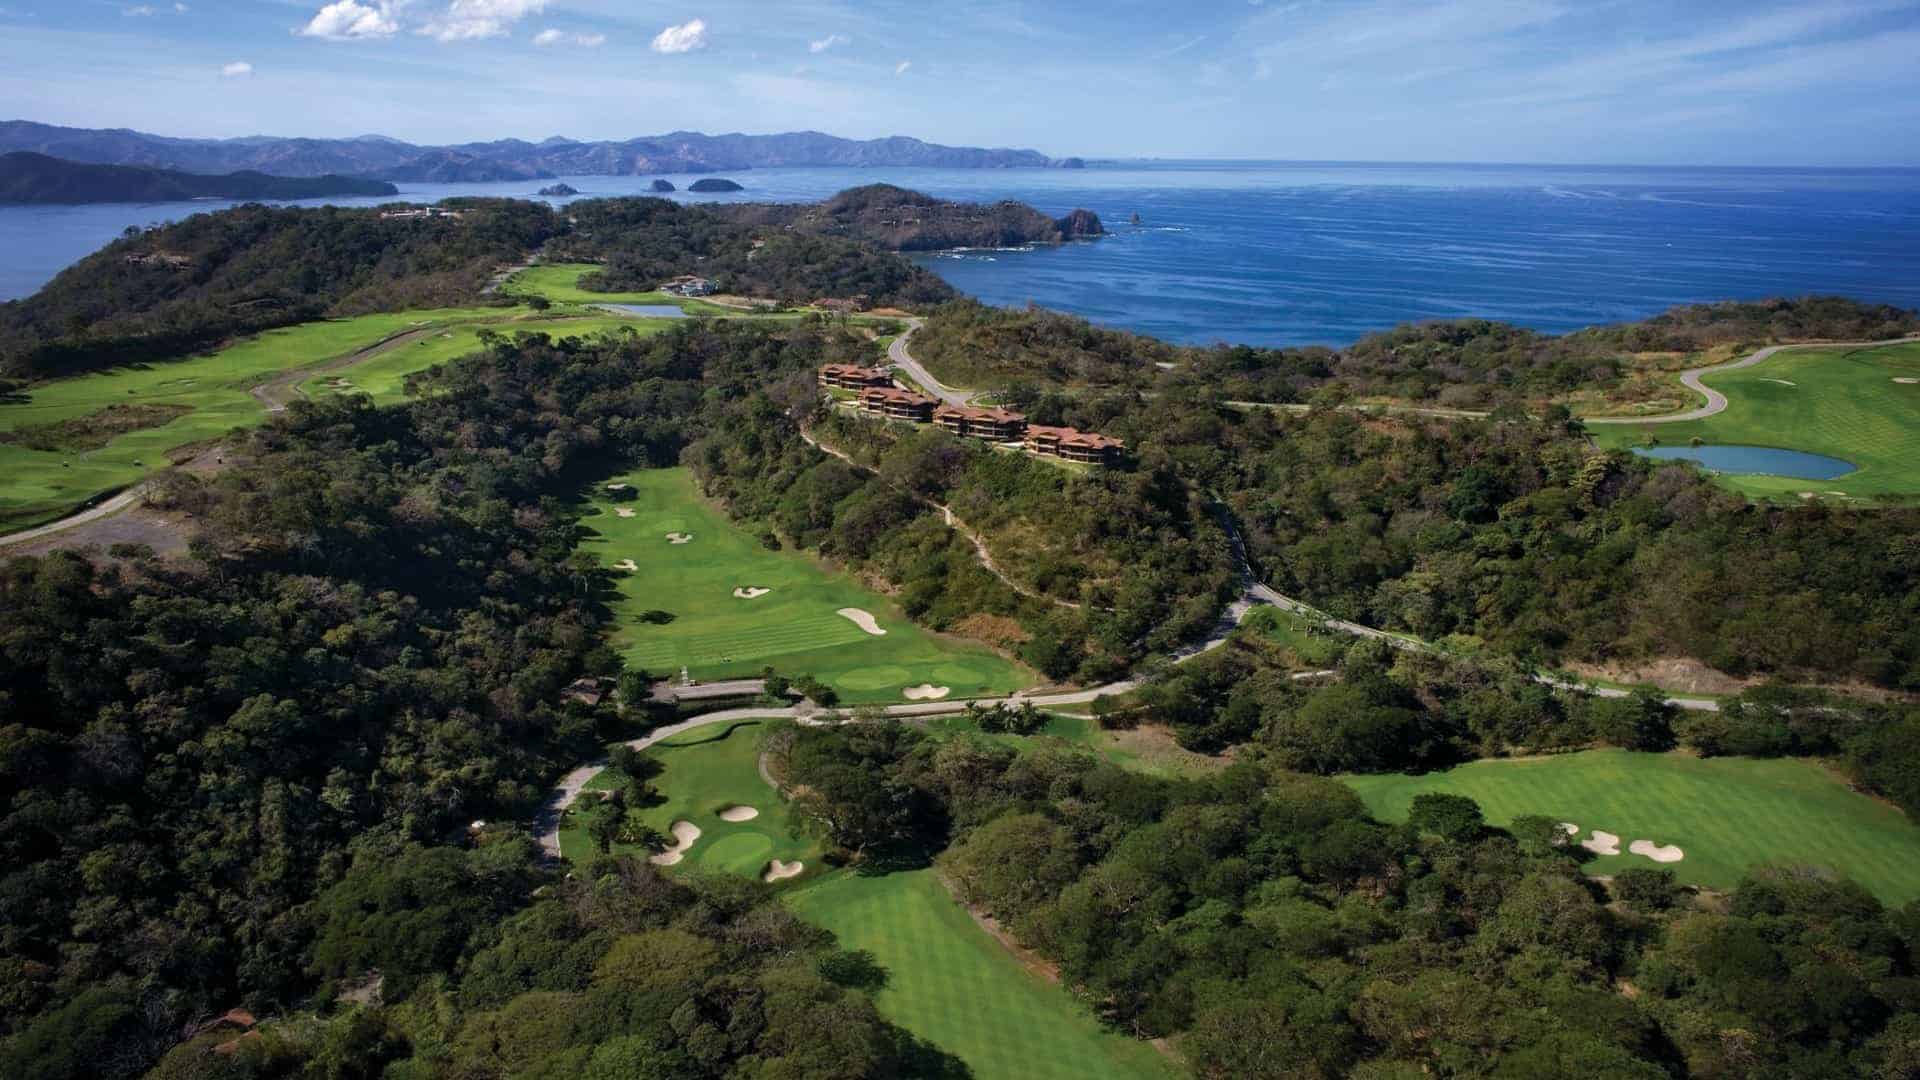 An aerial view of the Ocean Course at Peninsula Papagayo, coastal golf course with lush fairways, white sand bunkers, and multiple greens nestled among tropical forested hills. The course is adjacent to a deep blue ocean with scattered islands visible in the distance. Roads wind through the hills, and a row of terracotta-roofed structures sits atop one ridge, overlooking the scenic landscape.